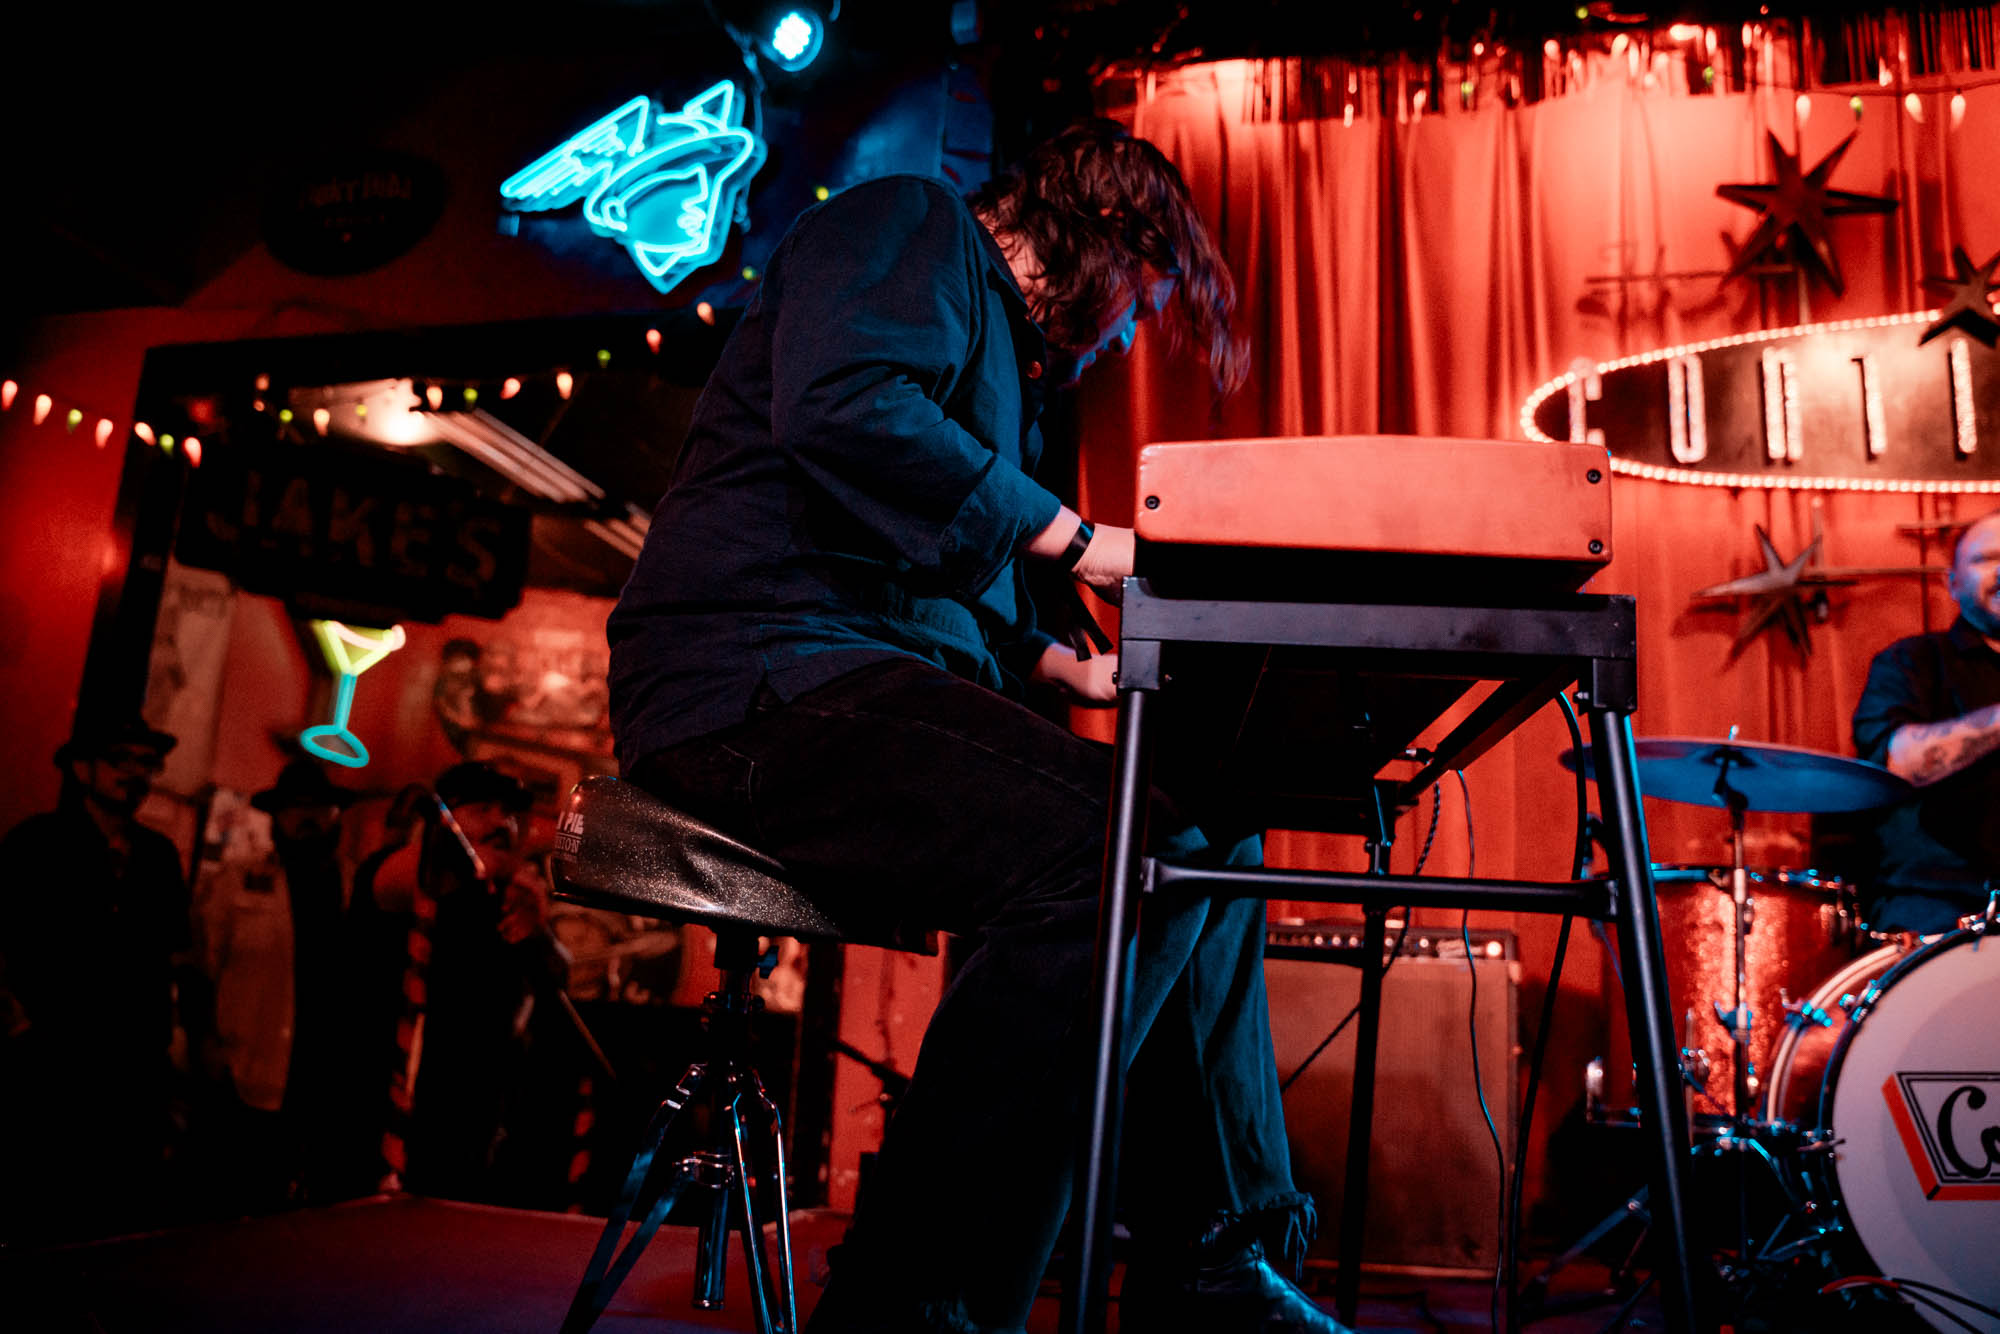 A musician playing keyboard on stage